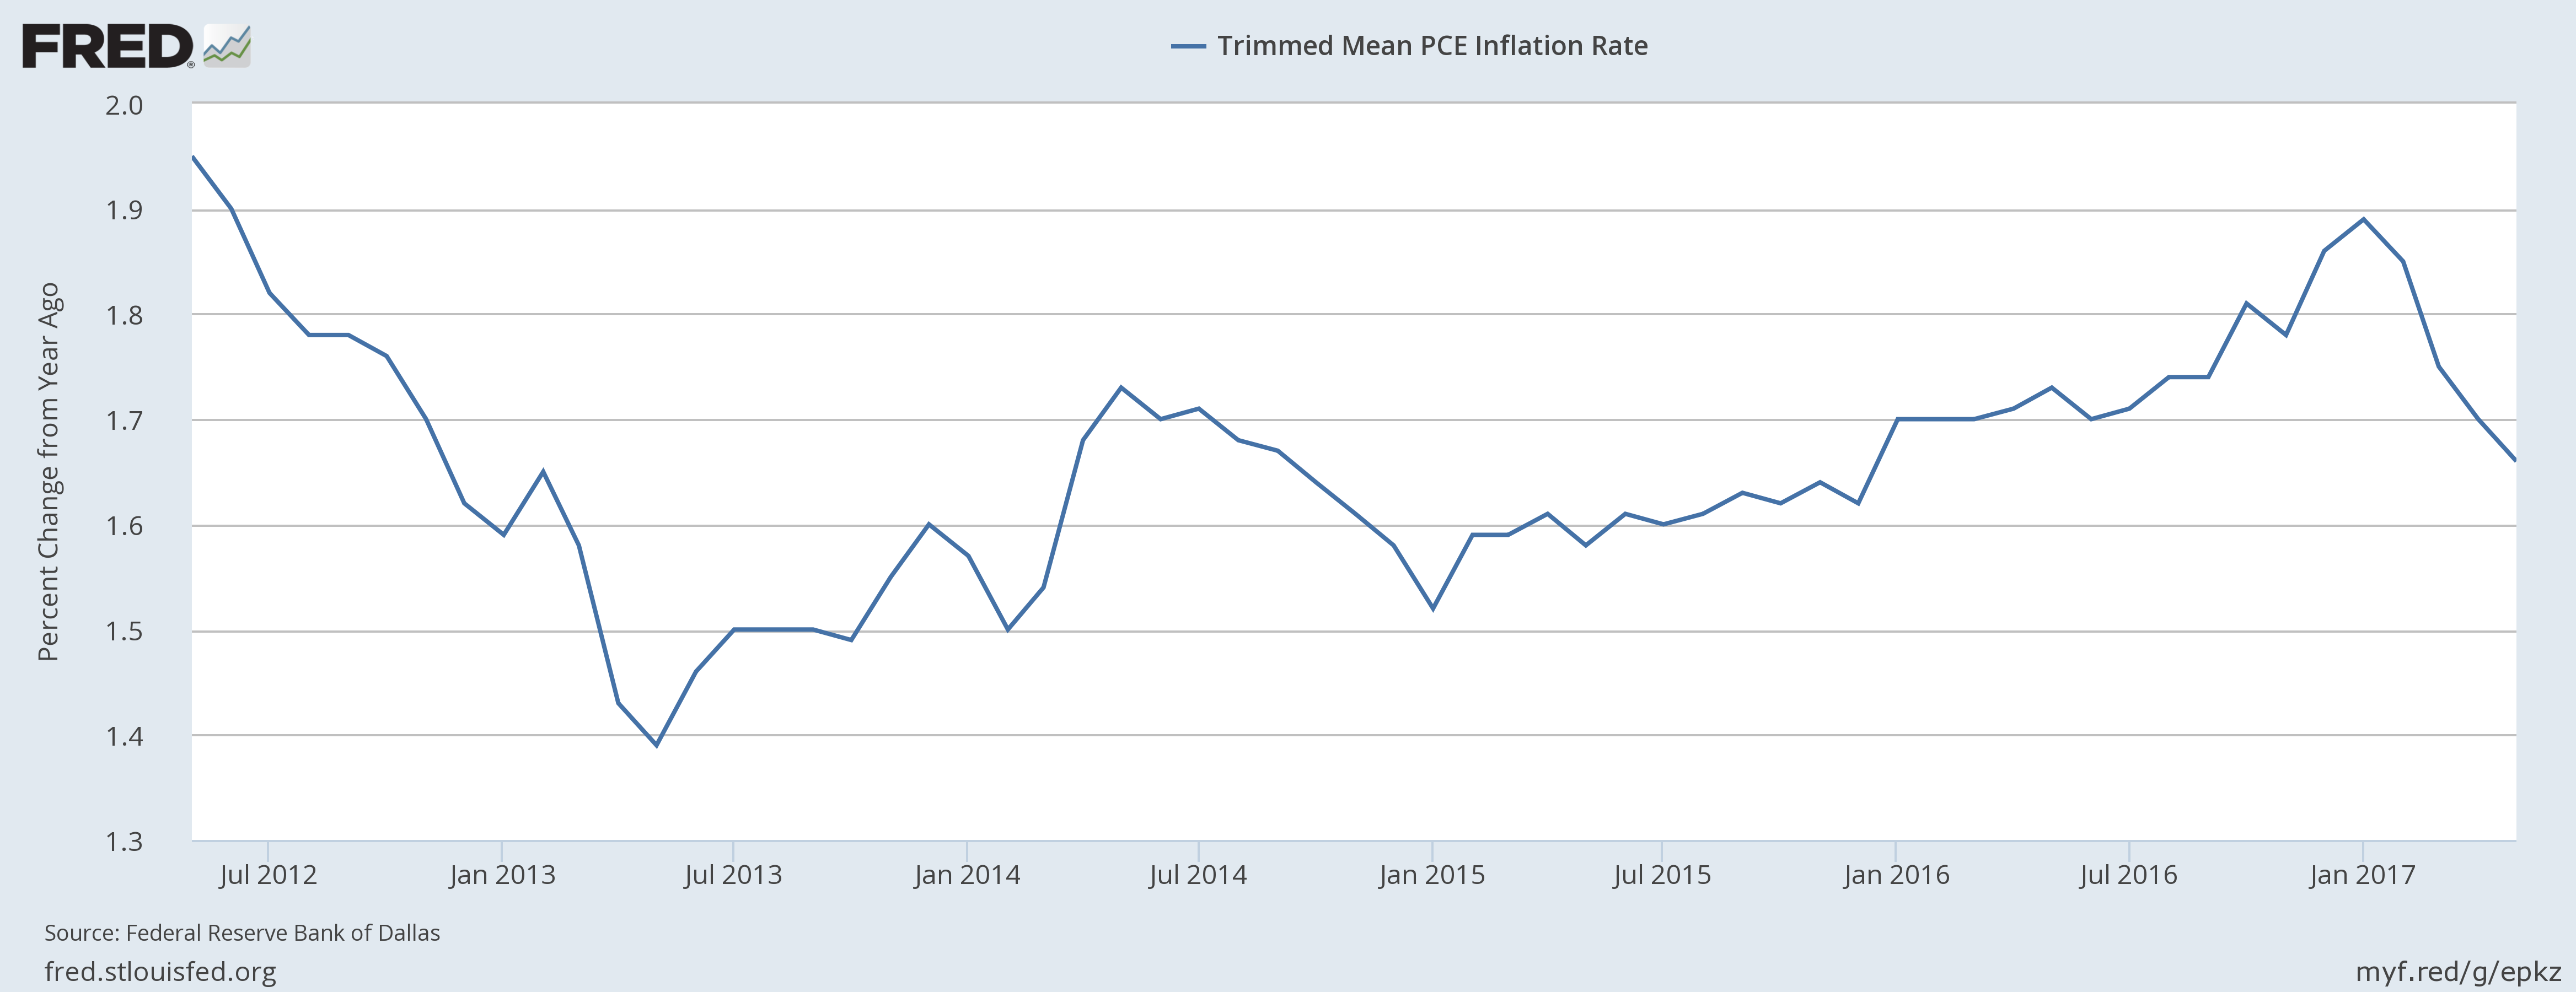 Tremmed Mean PCE Inflation Rate